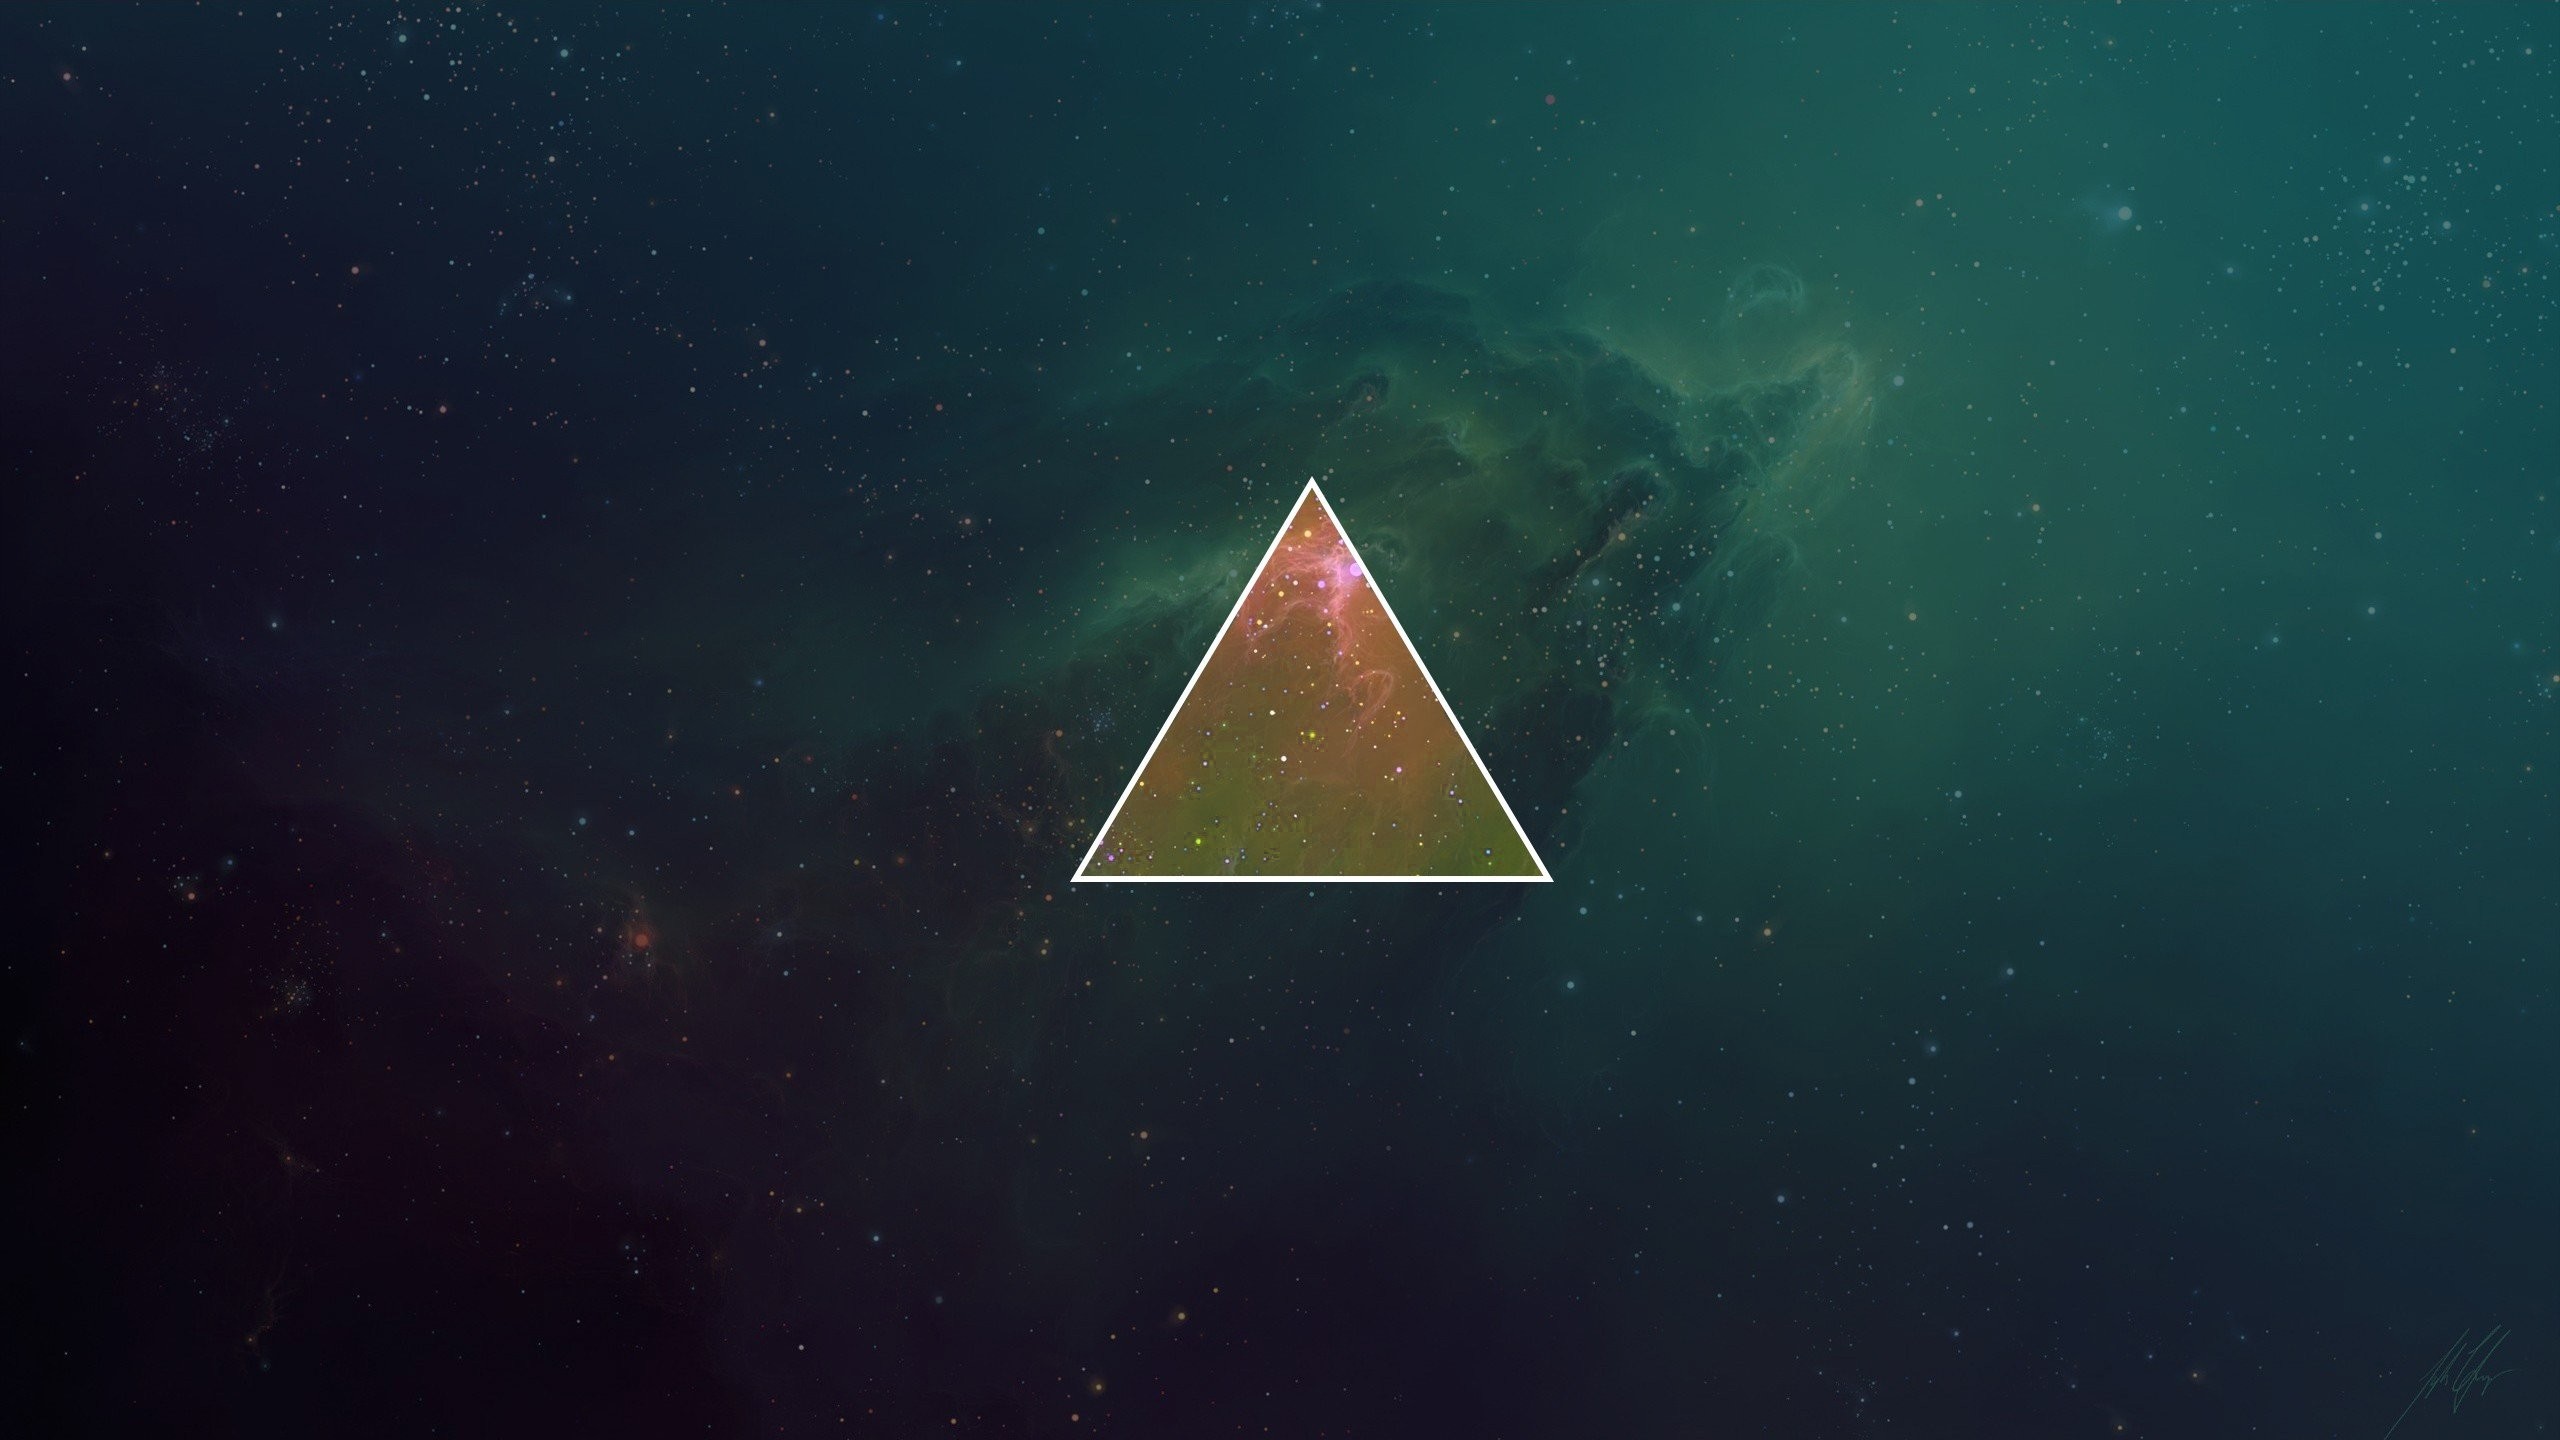 Galaxy Triangles Skies Hipster Photography Minimalism free iPhone or Android Full HD wallpaper